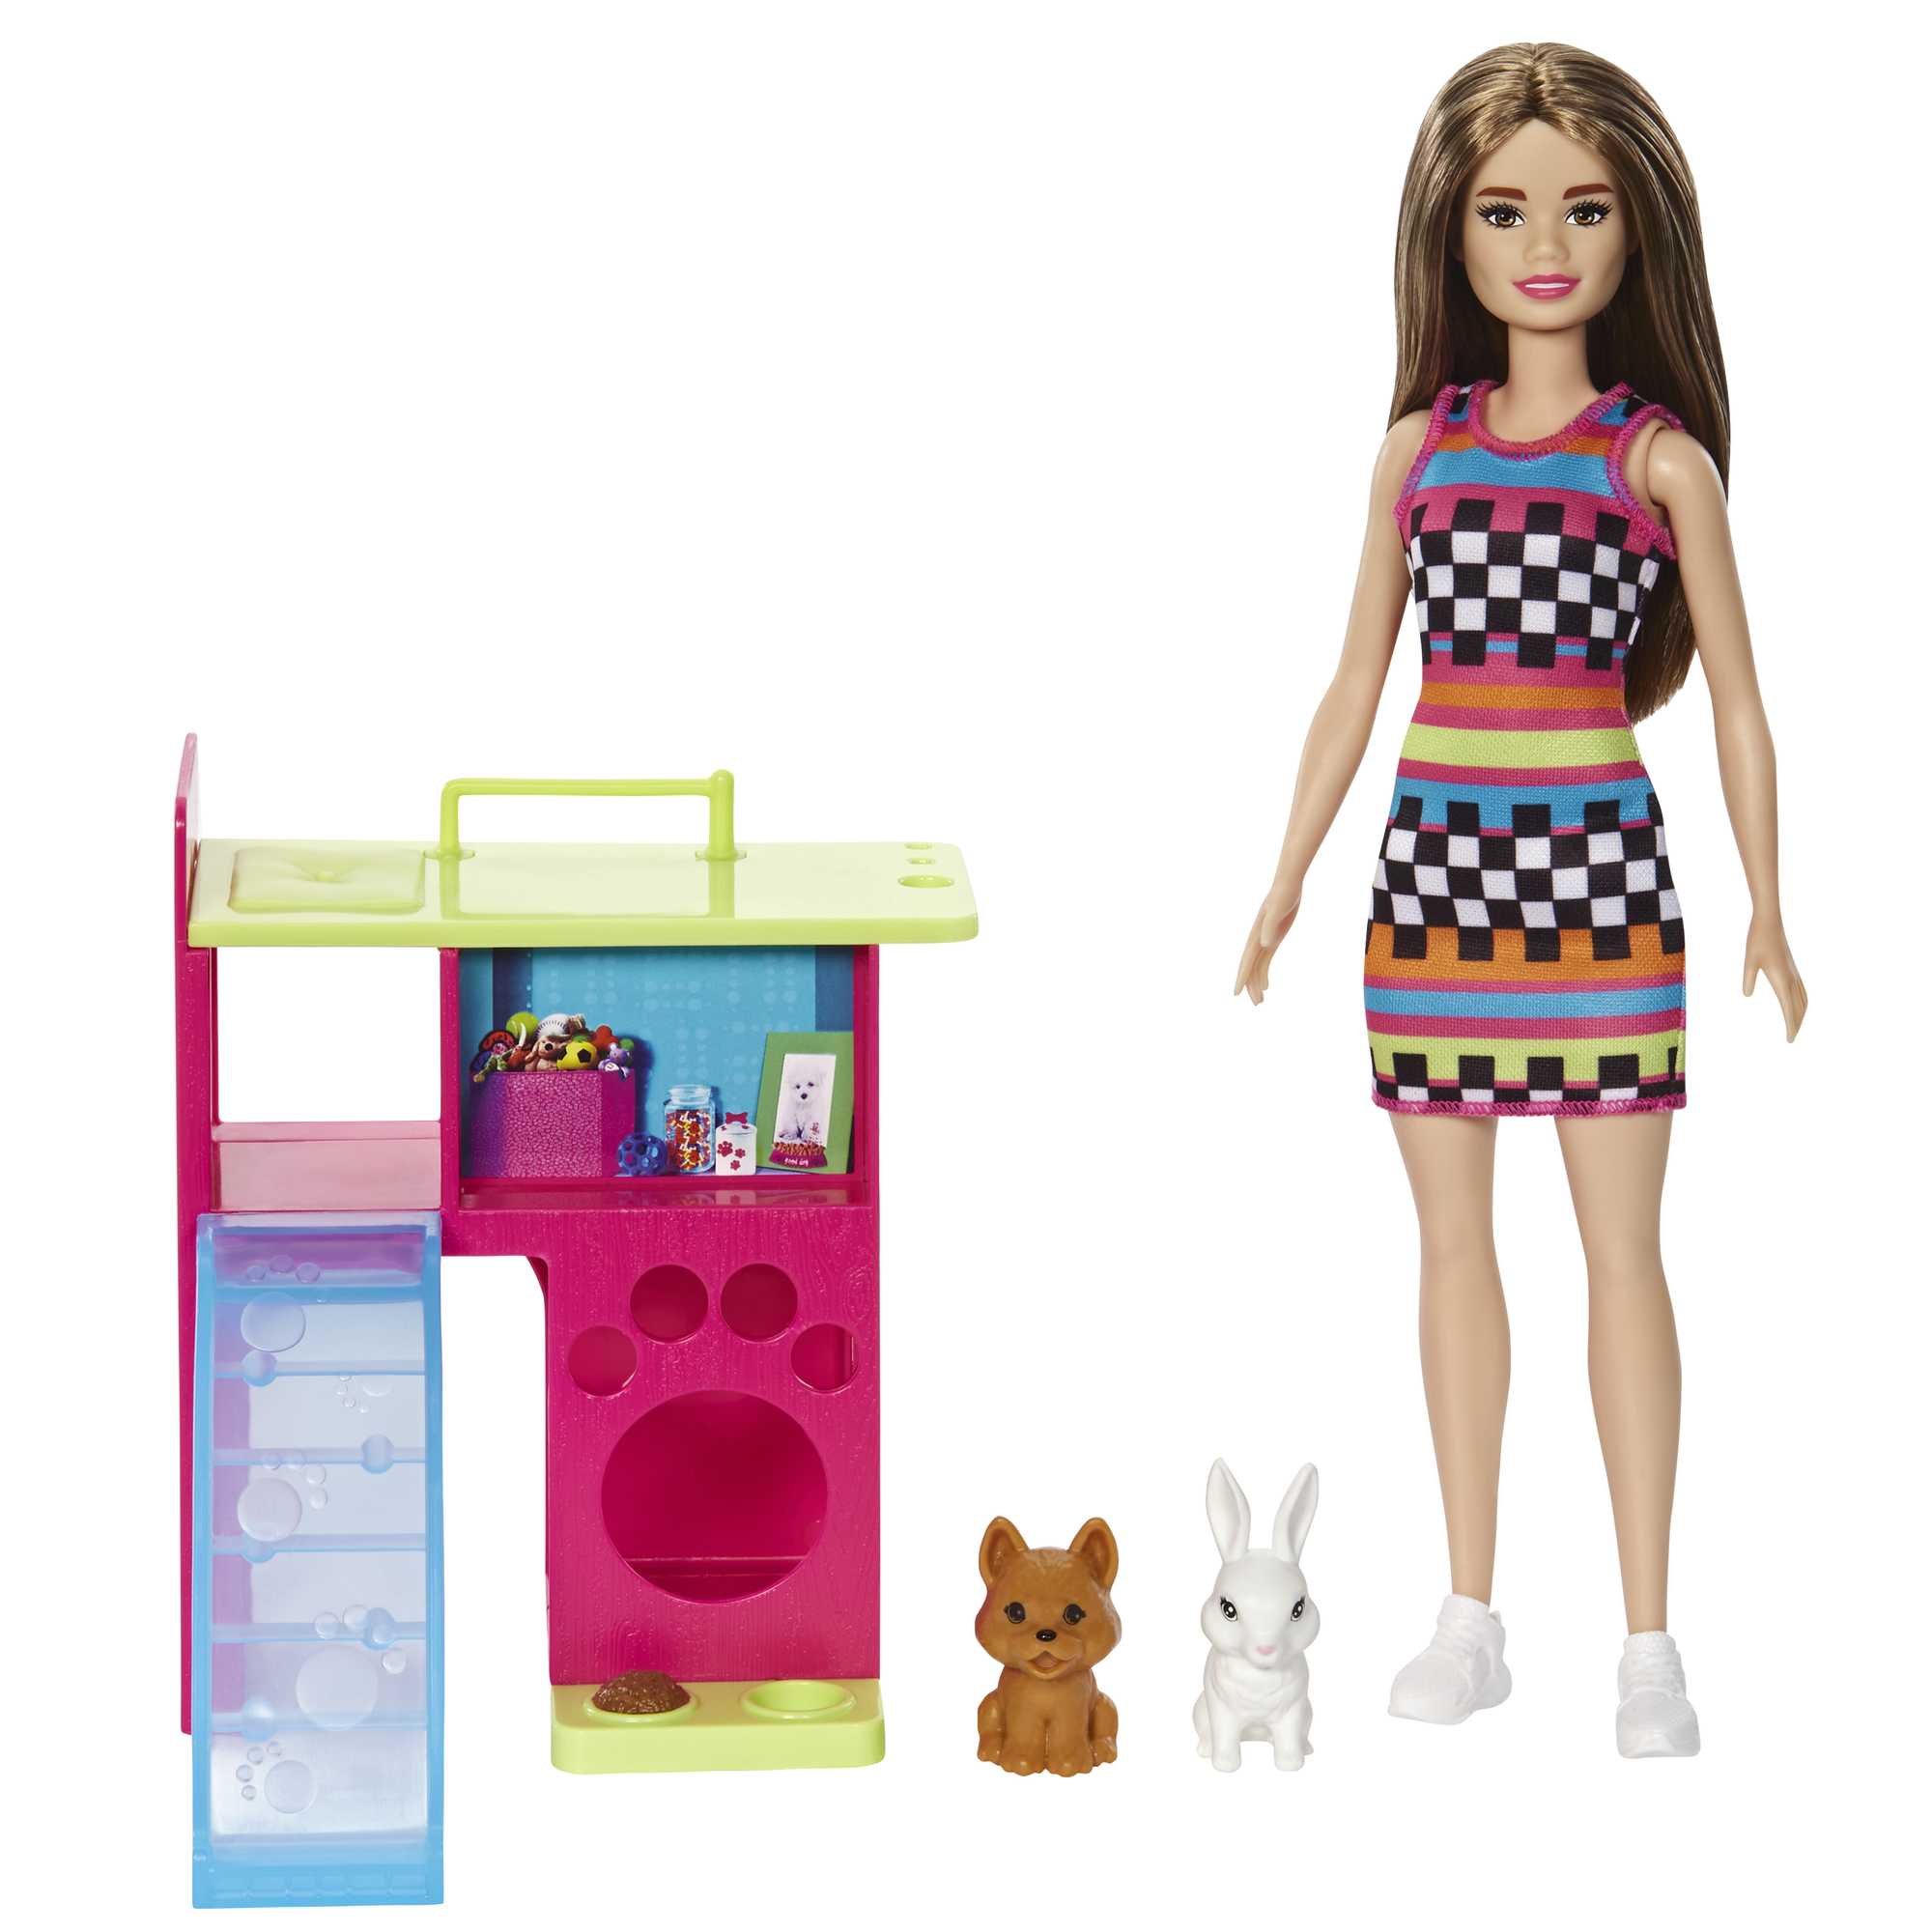 Barbie Doll With Playhouse Playset by Mattel -Mattel - India - www.superherotoystore.com